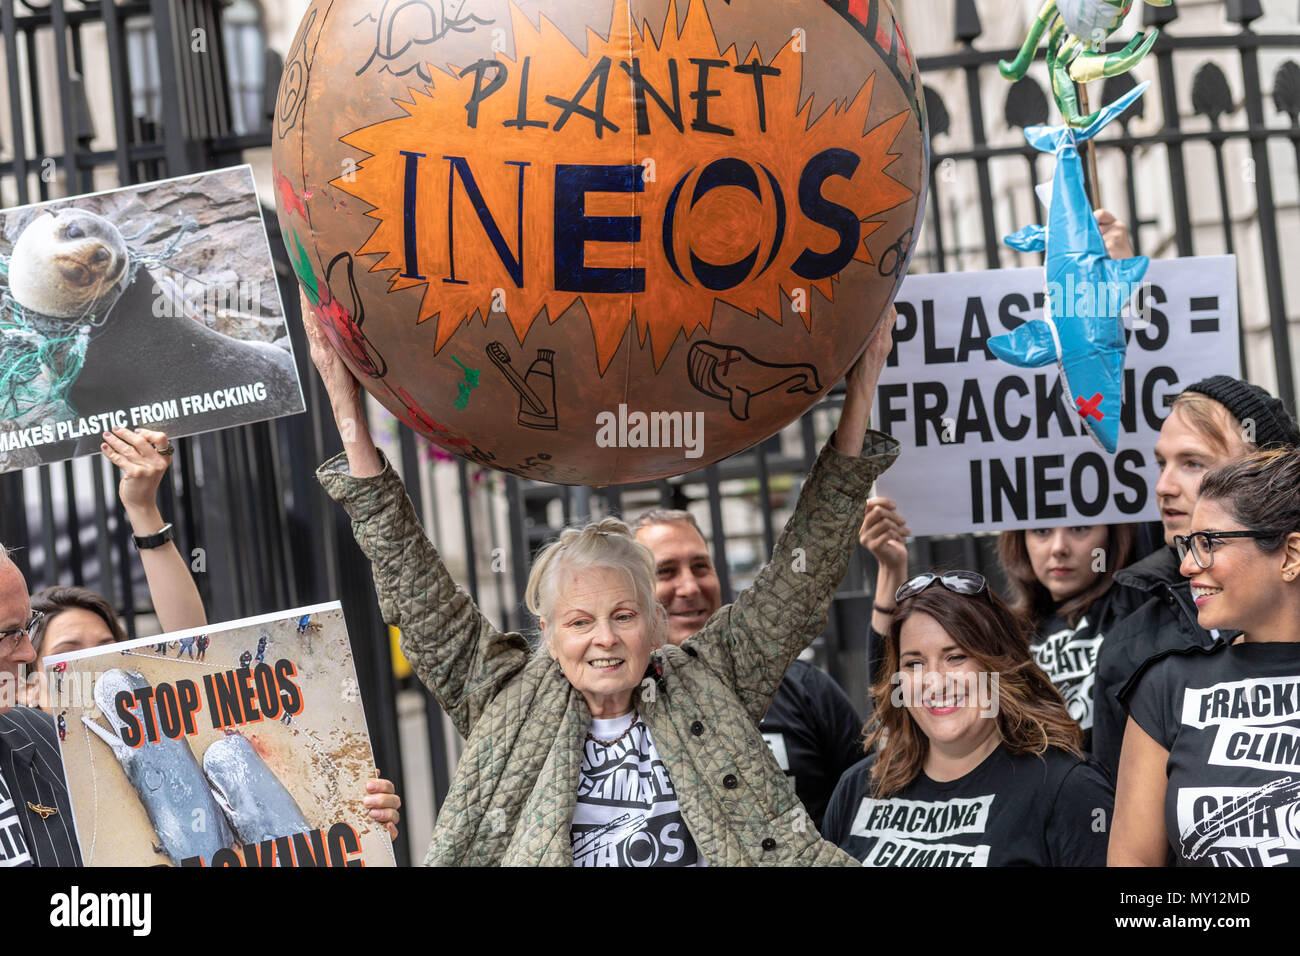 London, UK.  5th June 2018, Vivienne Westwood in anti fracking protest at Downing Street Credit Ian Davidson/Alamy Live News Stock Photo